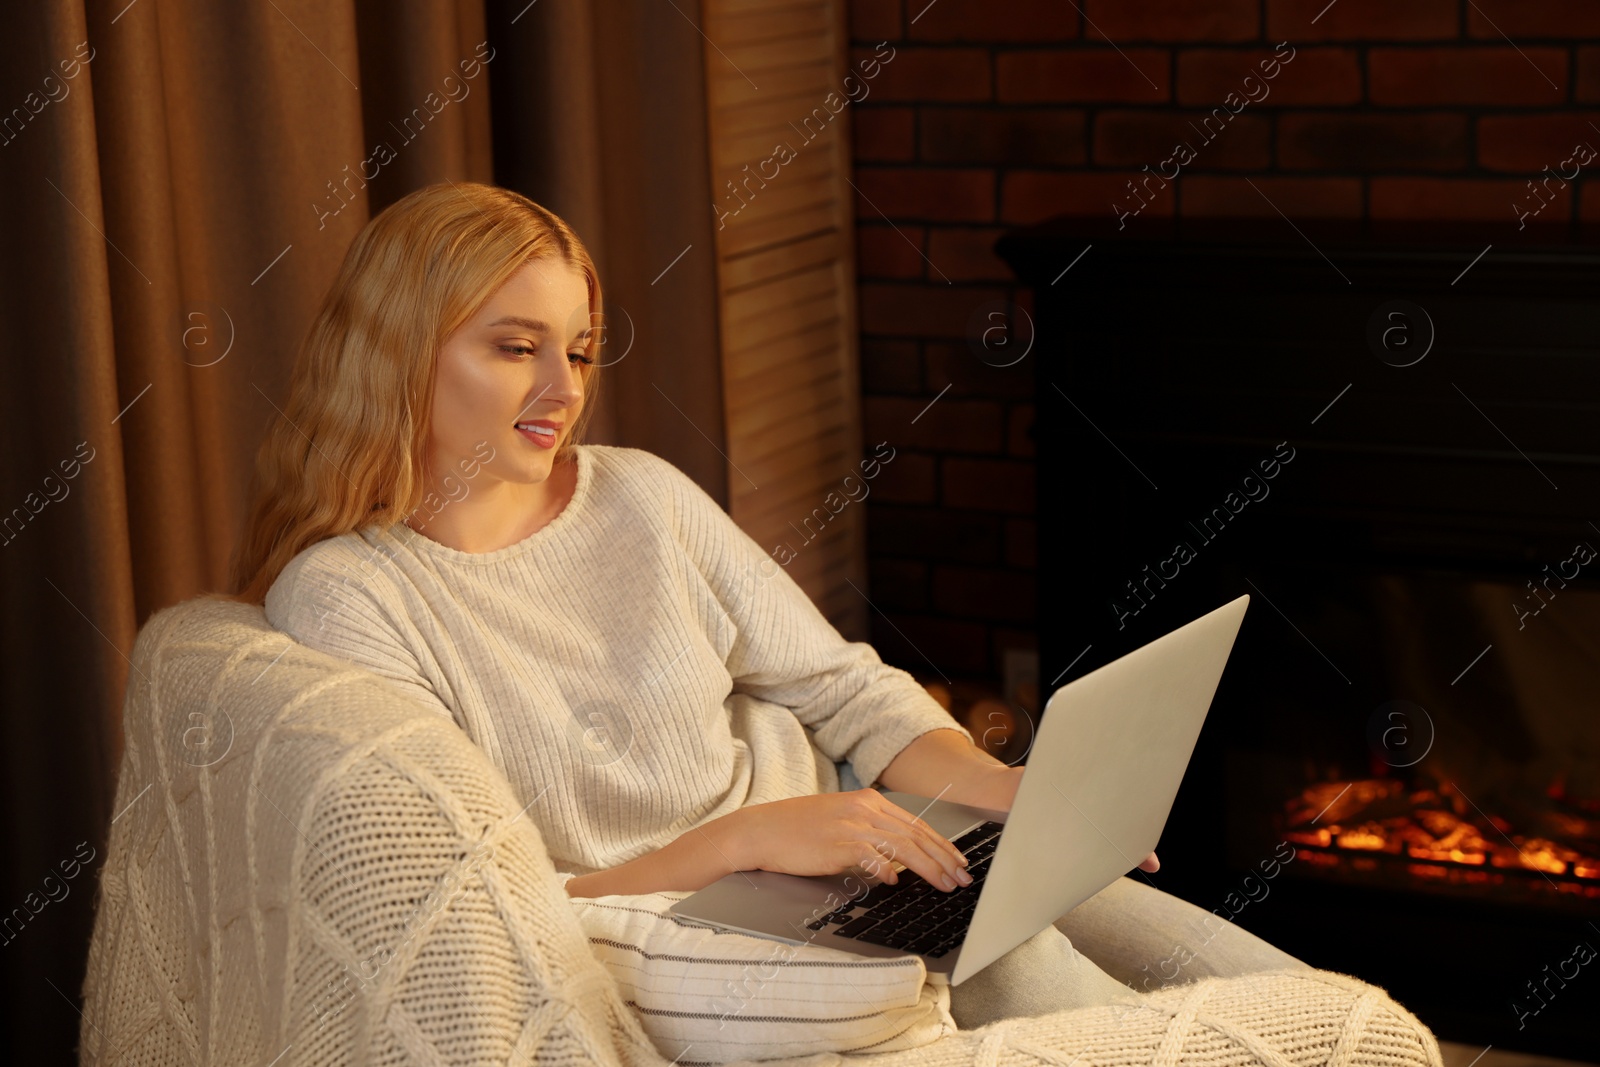 Photo of Young woman working on laptop near fireplace in room